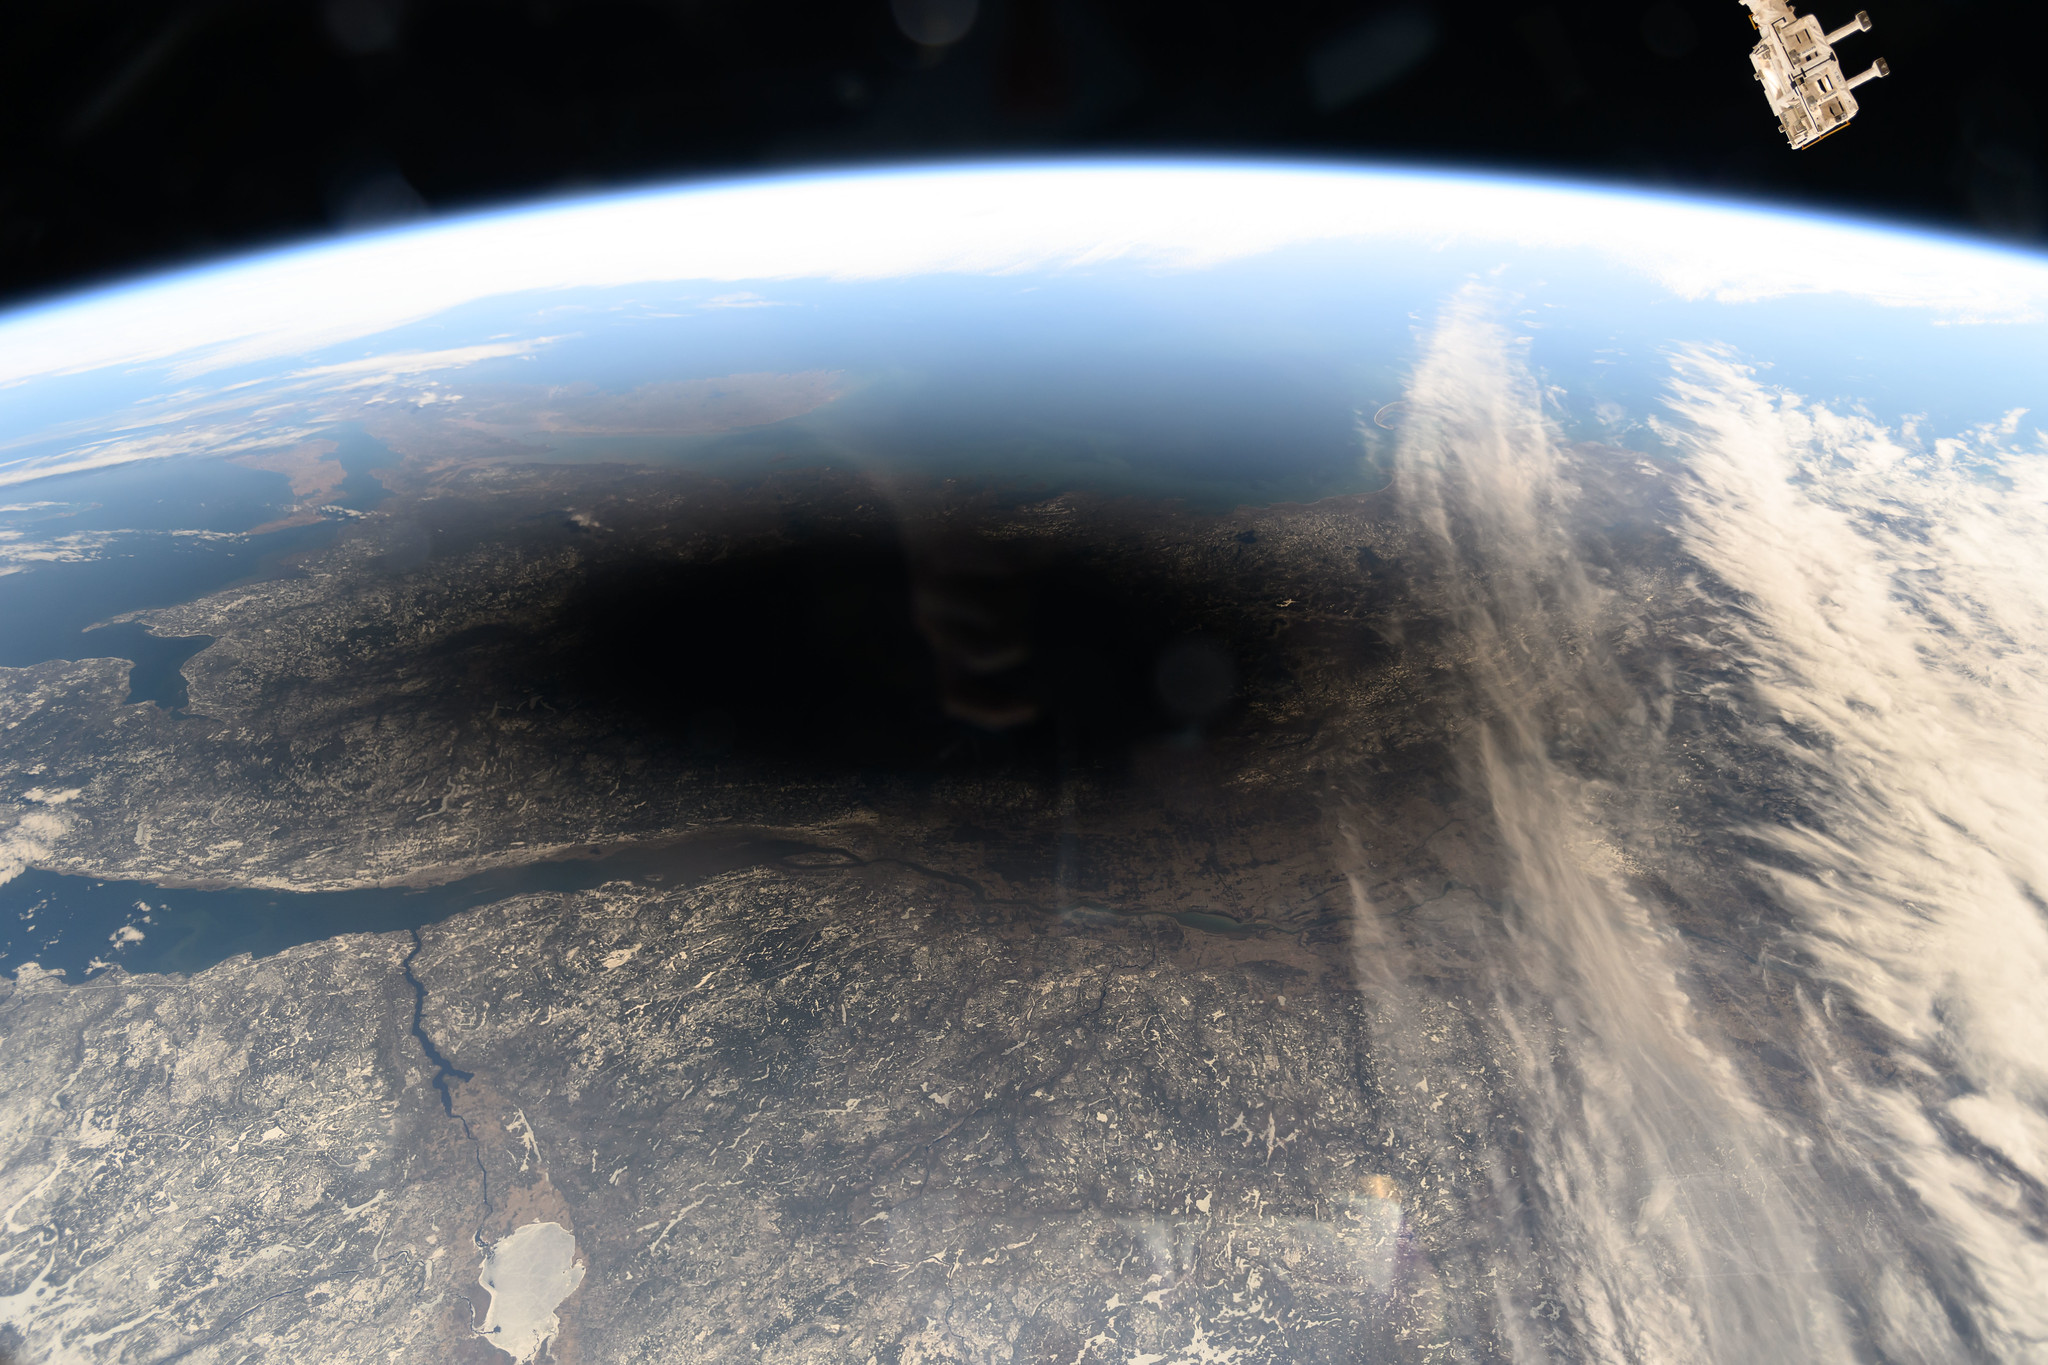 View of Earth from ISS. Atmosphere is mostly clear. A dark shadow blocks the landscape in the center of the photo.